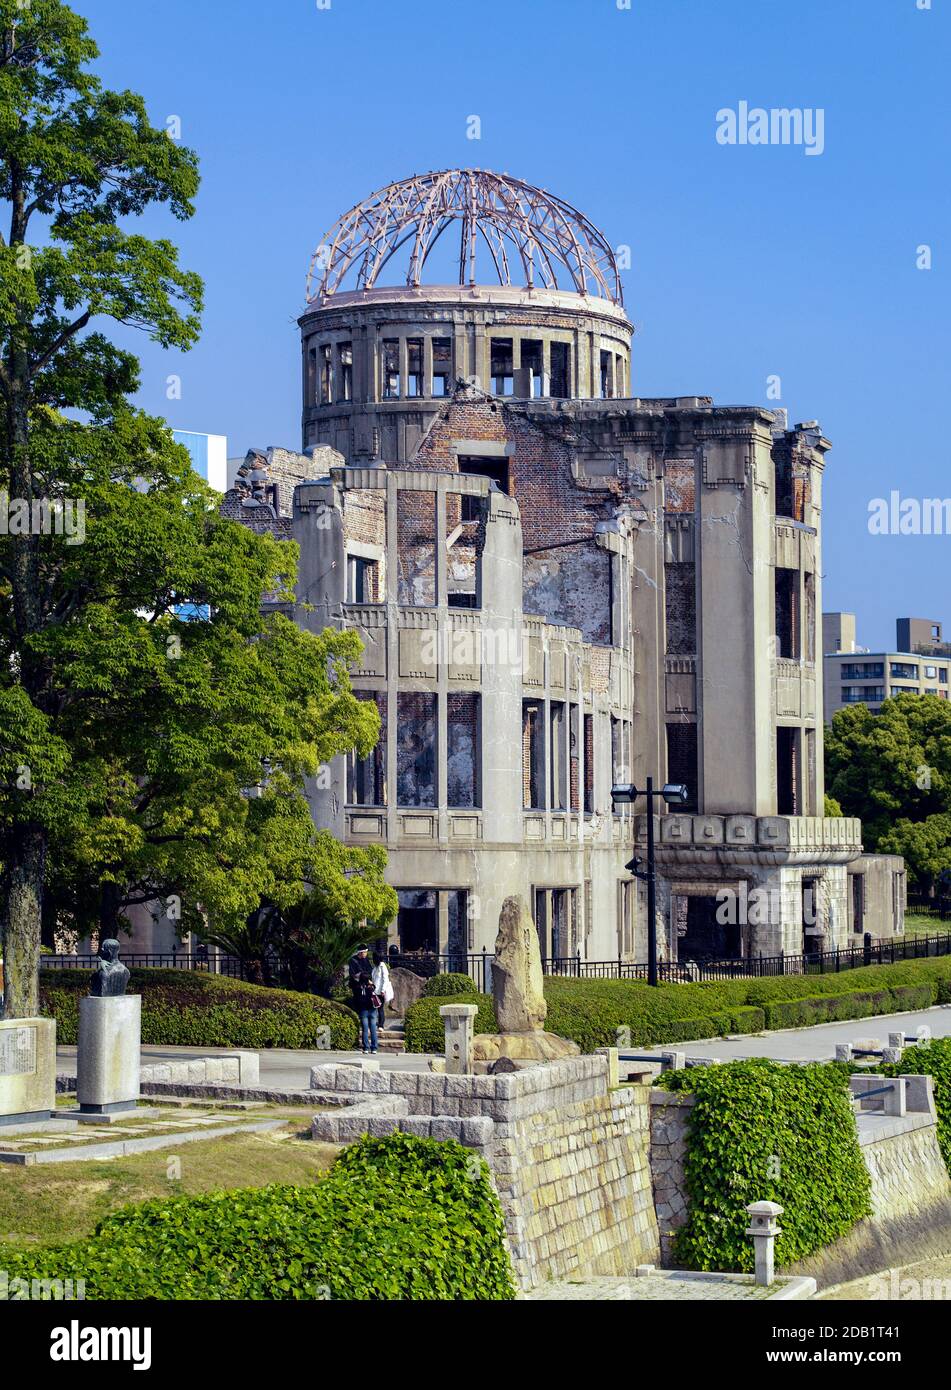 Hiroshima. Japan. 04.12.07. Preserved ruins of the A-Bome Dome in Hiroshima, Japan. One of only a few buildings at Ground Zero on August 6 1945 to sur Stock Photo